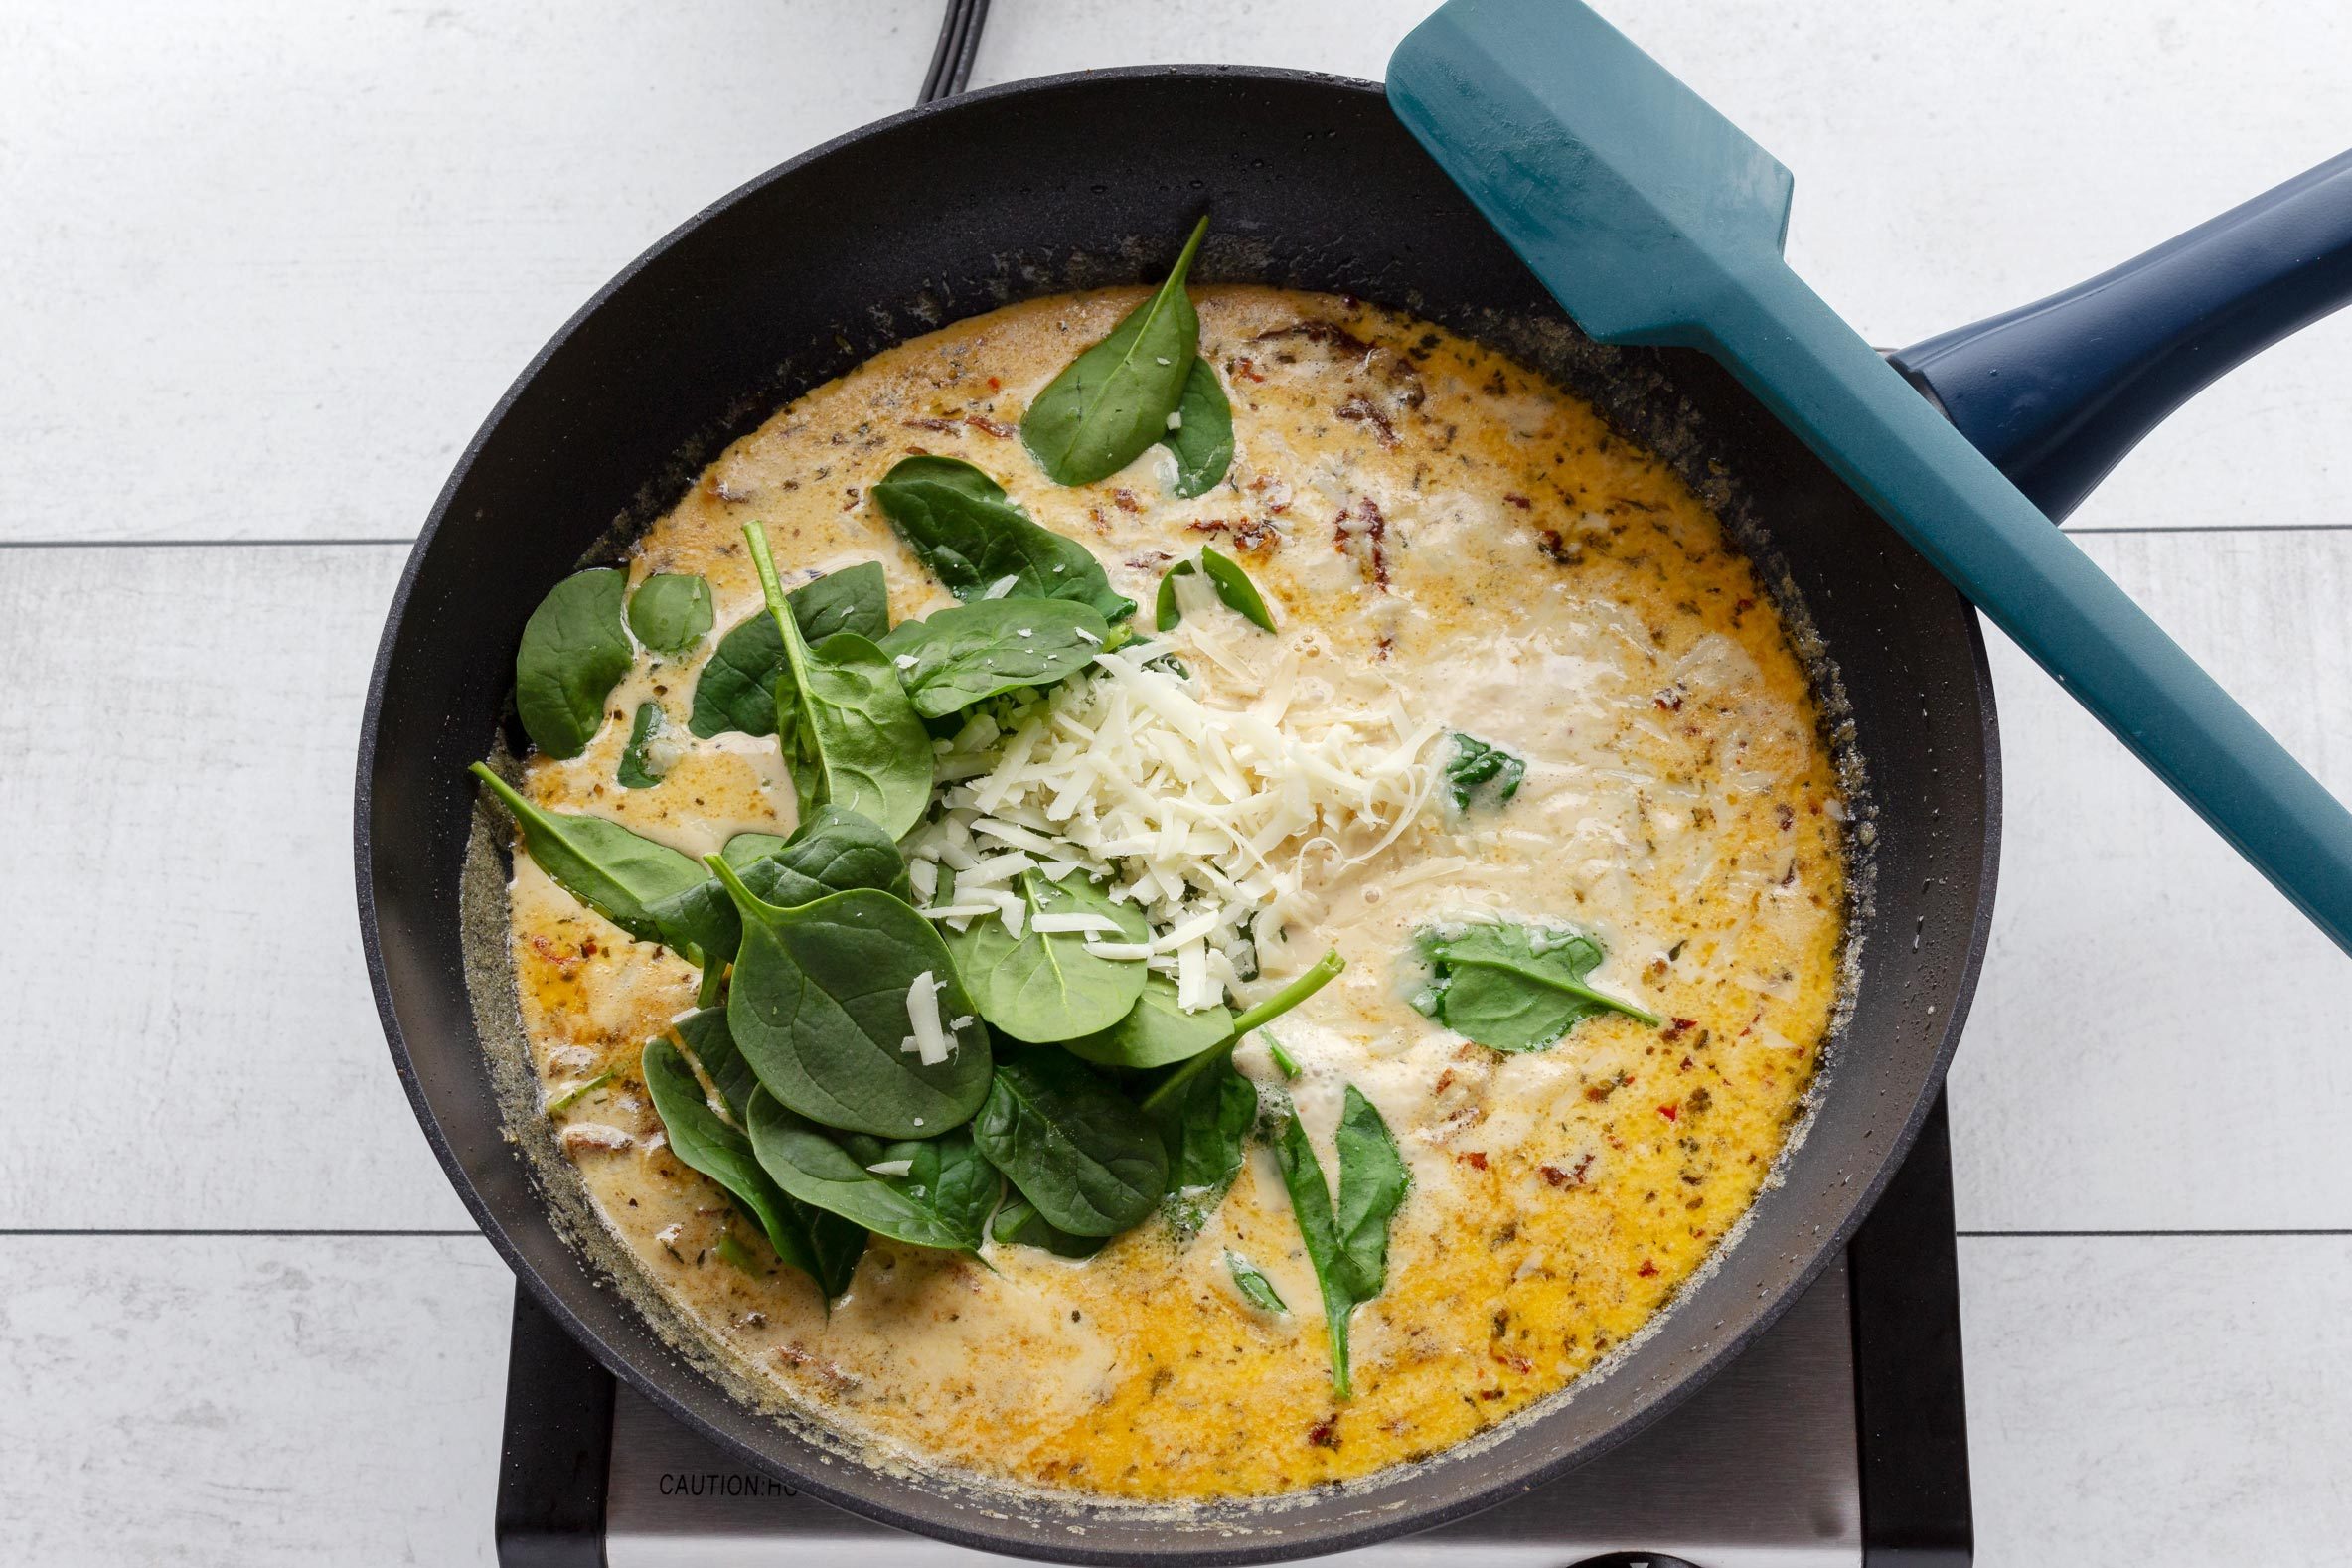 Adding the cream, spinach and cheese to the marry me chicken sauce in a skillet